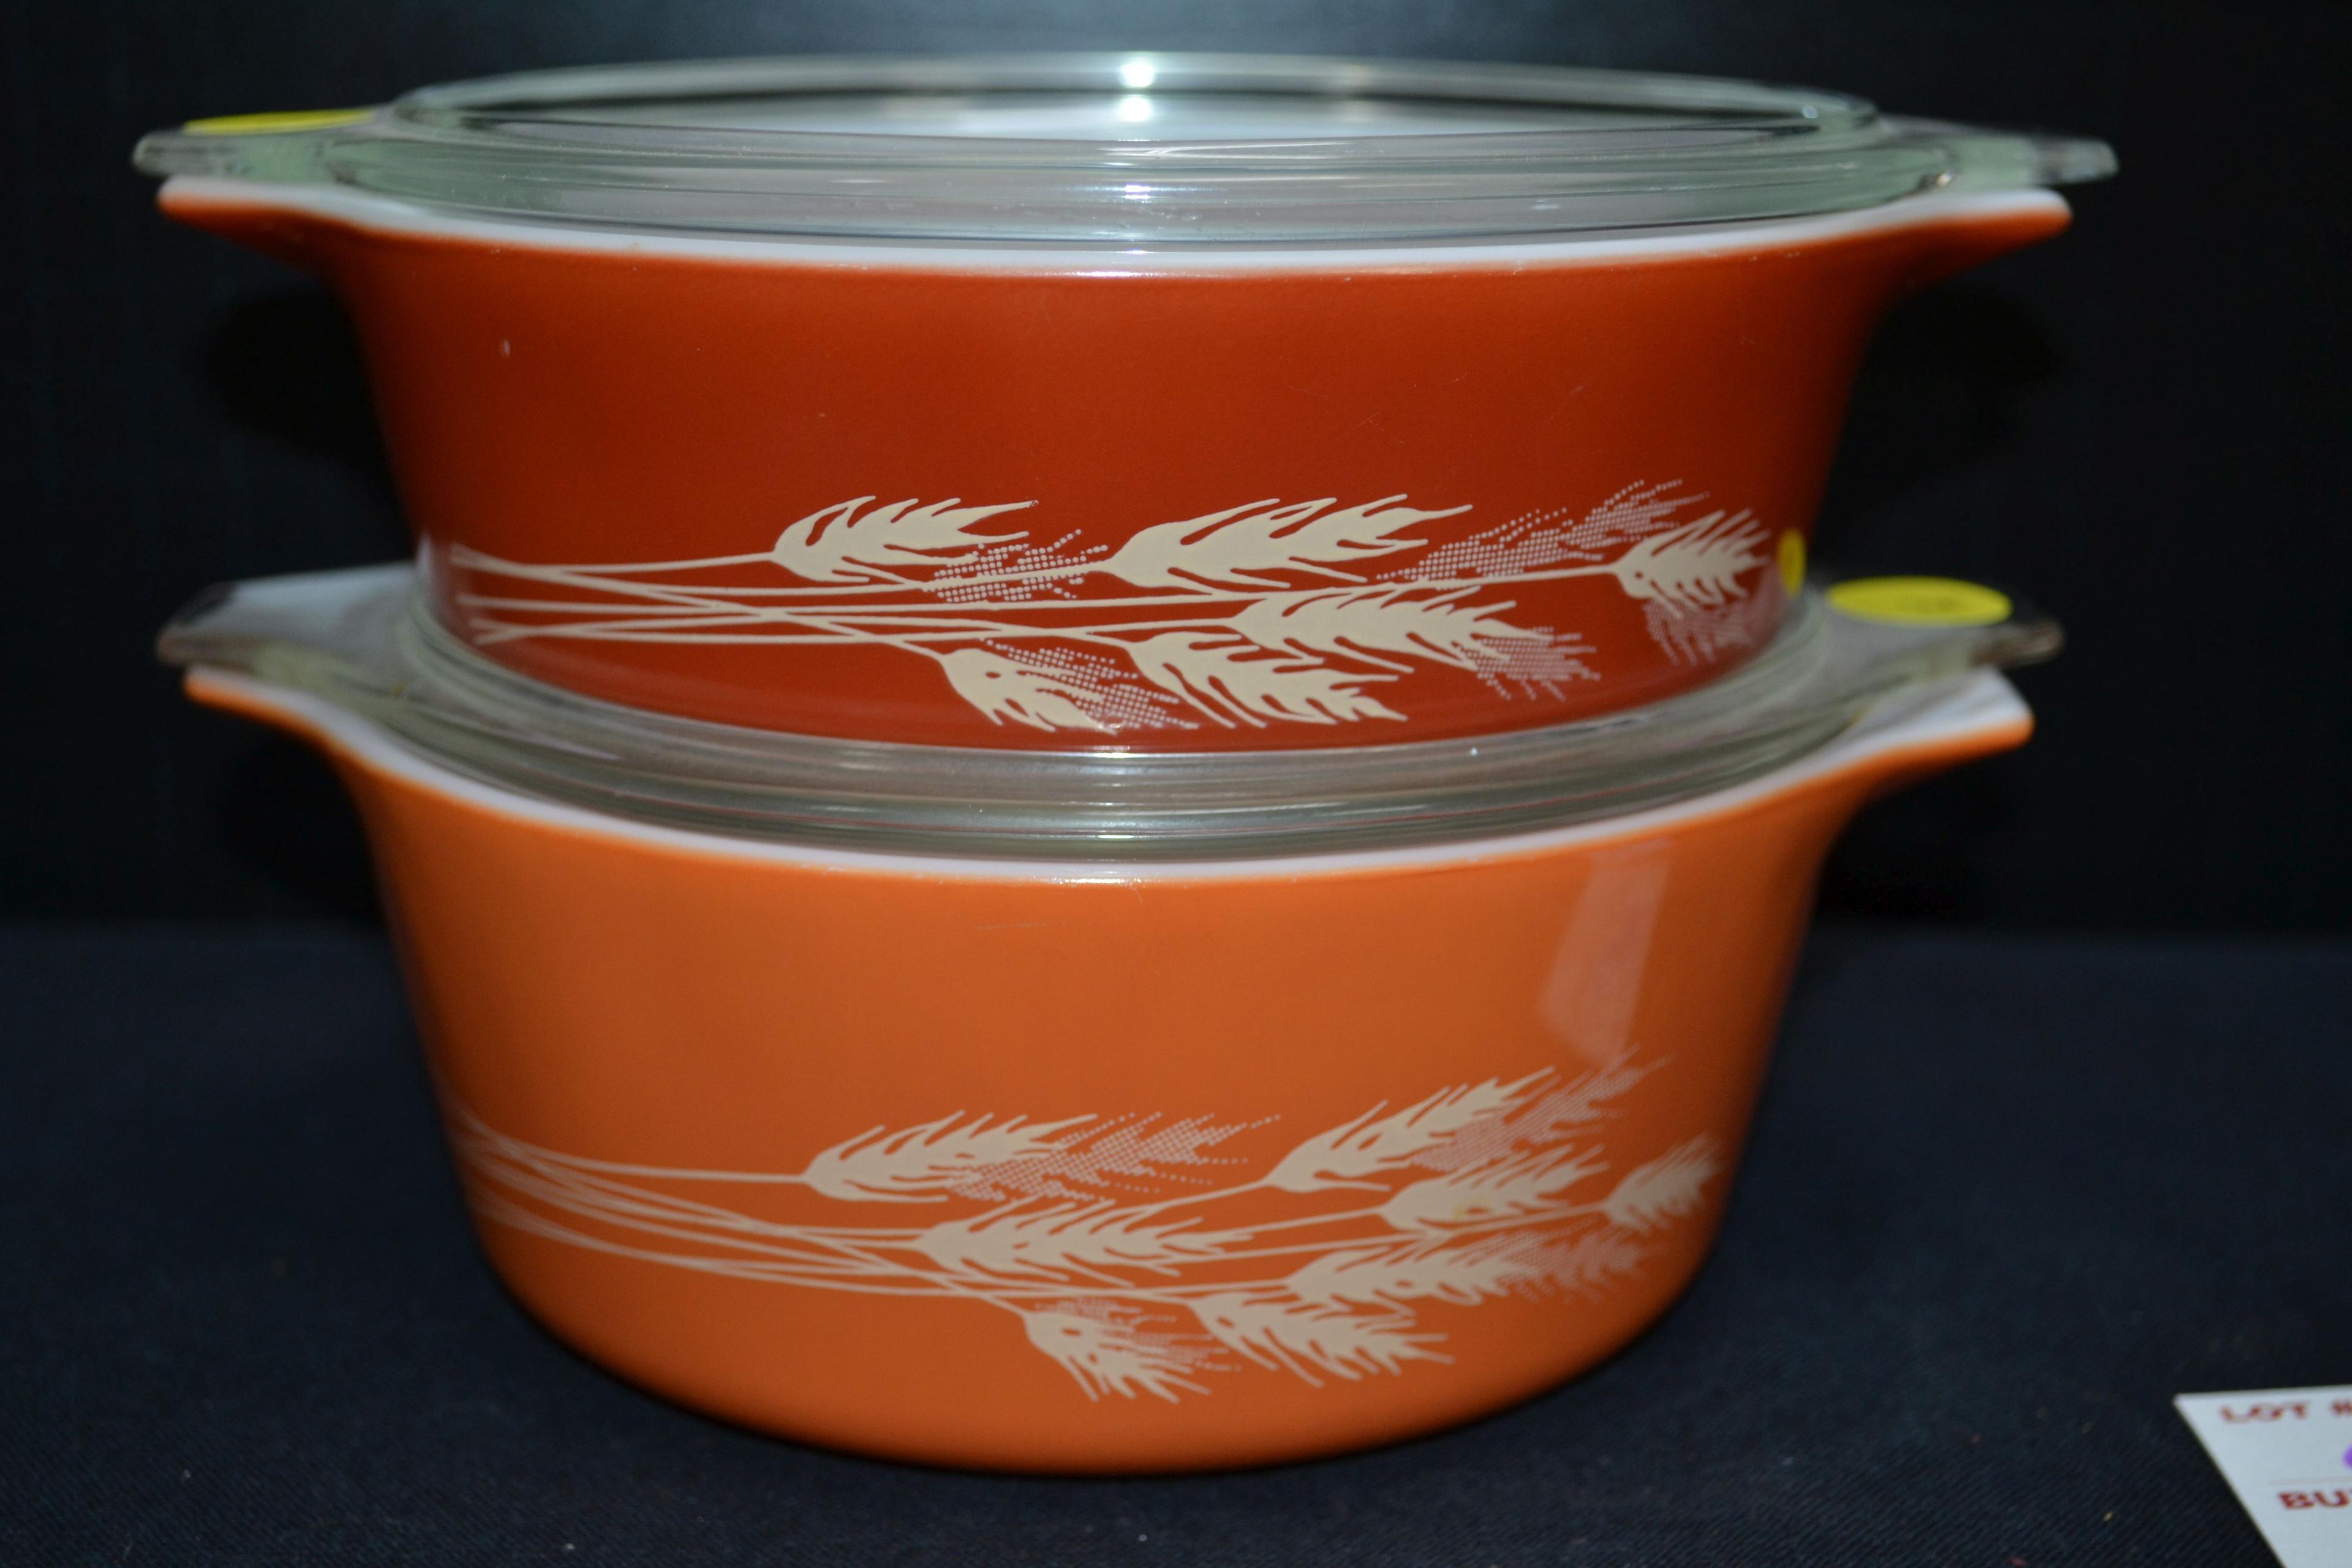 Pyrex Autumn Harvest Bake, Serve, and Store Dishes Nos. 471 and 472 w/Lids; Mfg. 1979-1986